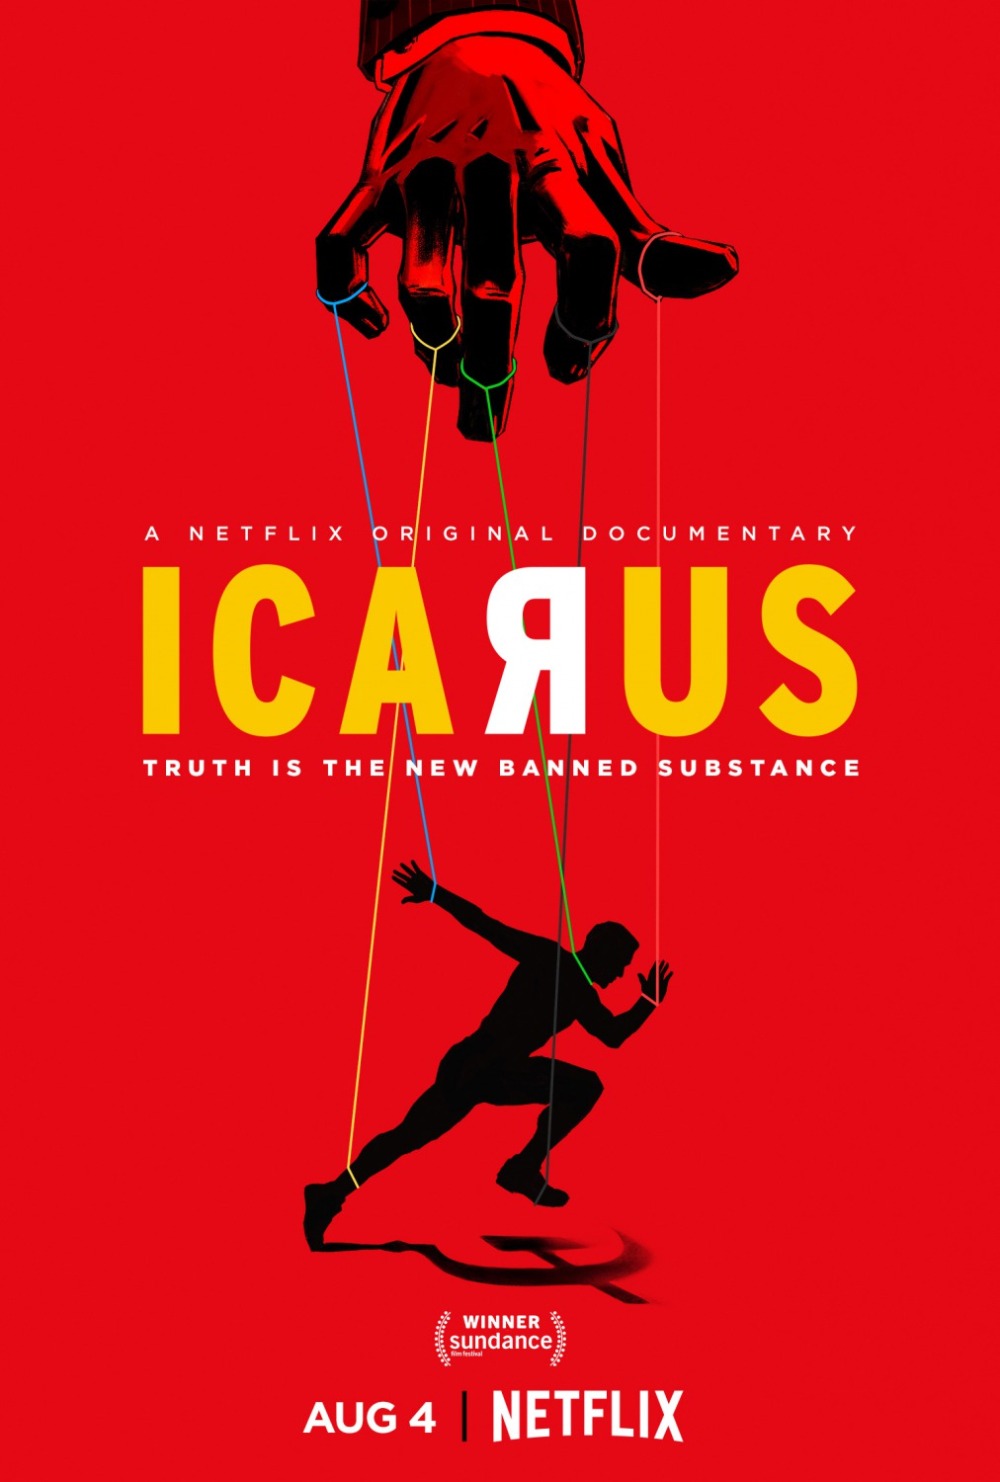 Icarus documentary poster